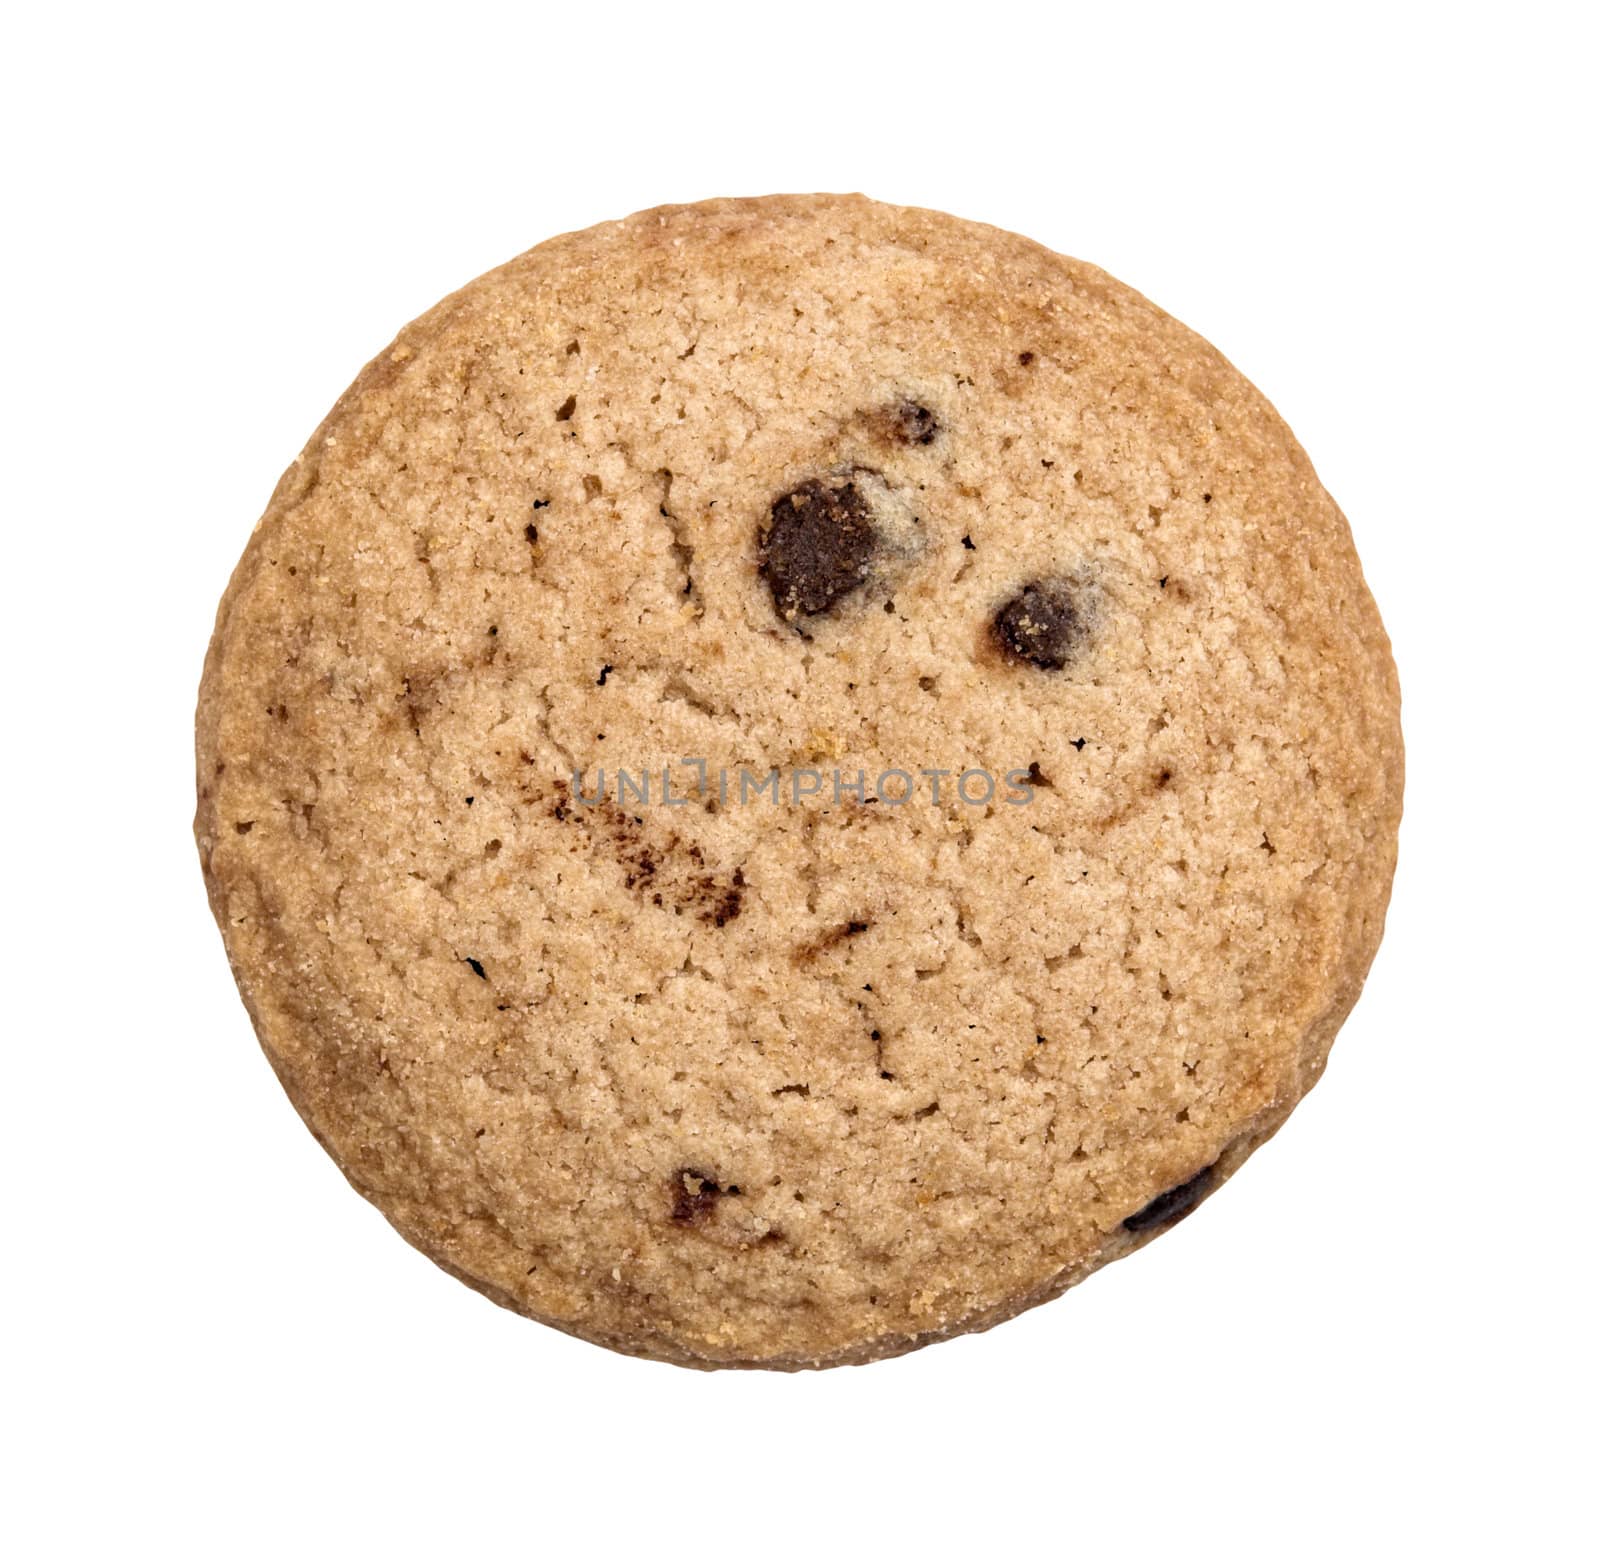 A single chocolate chip cookie isolated on a white background